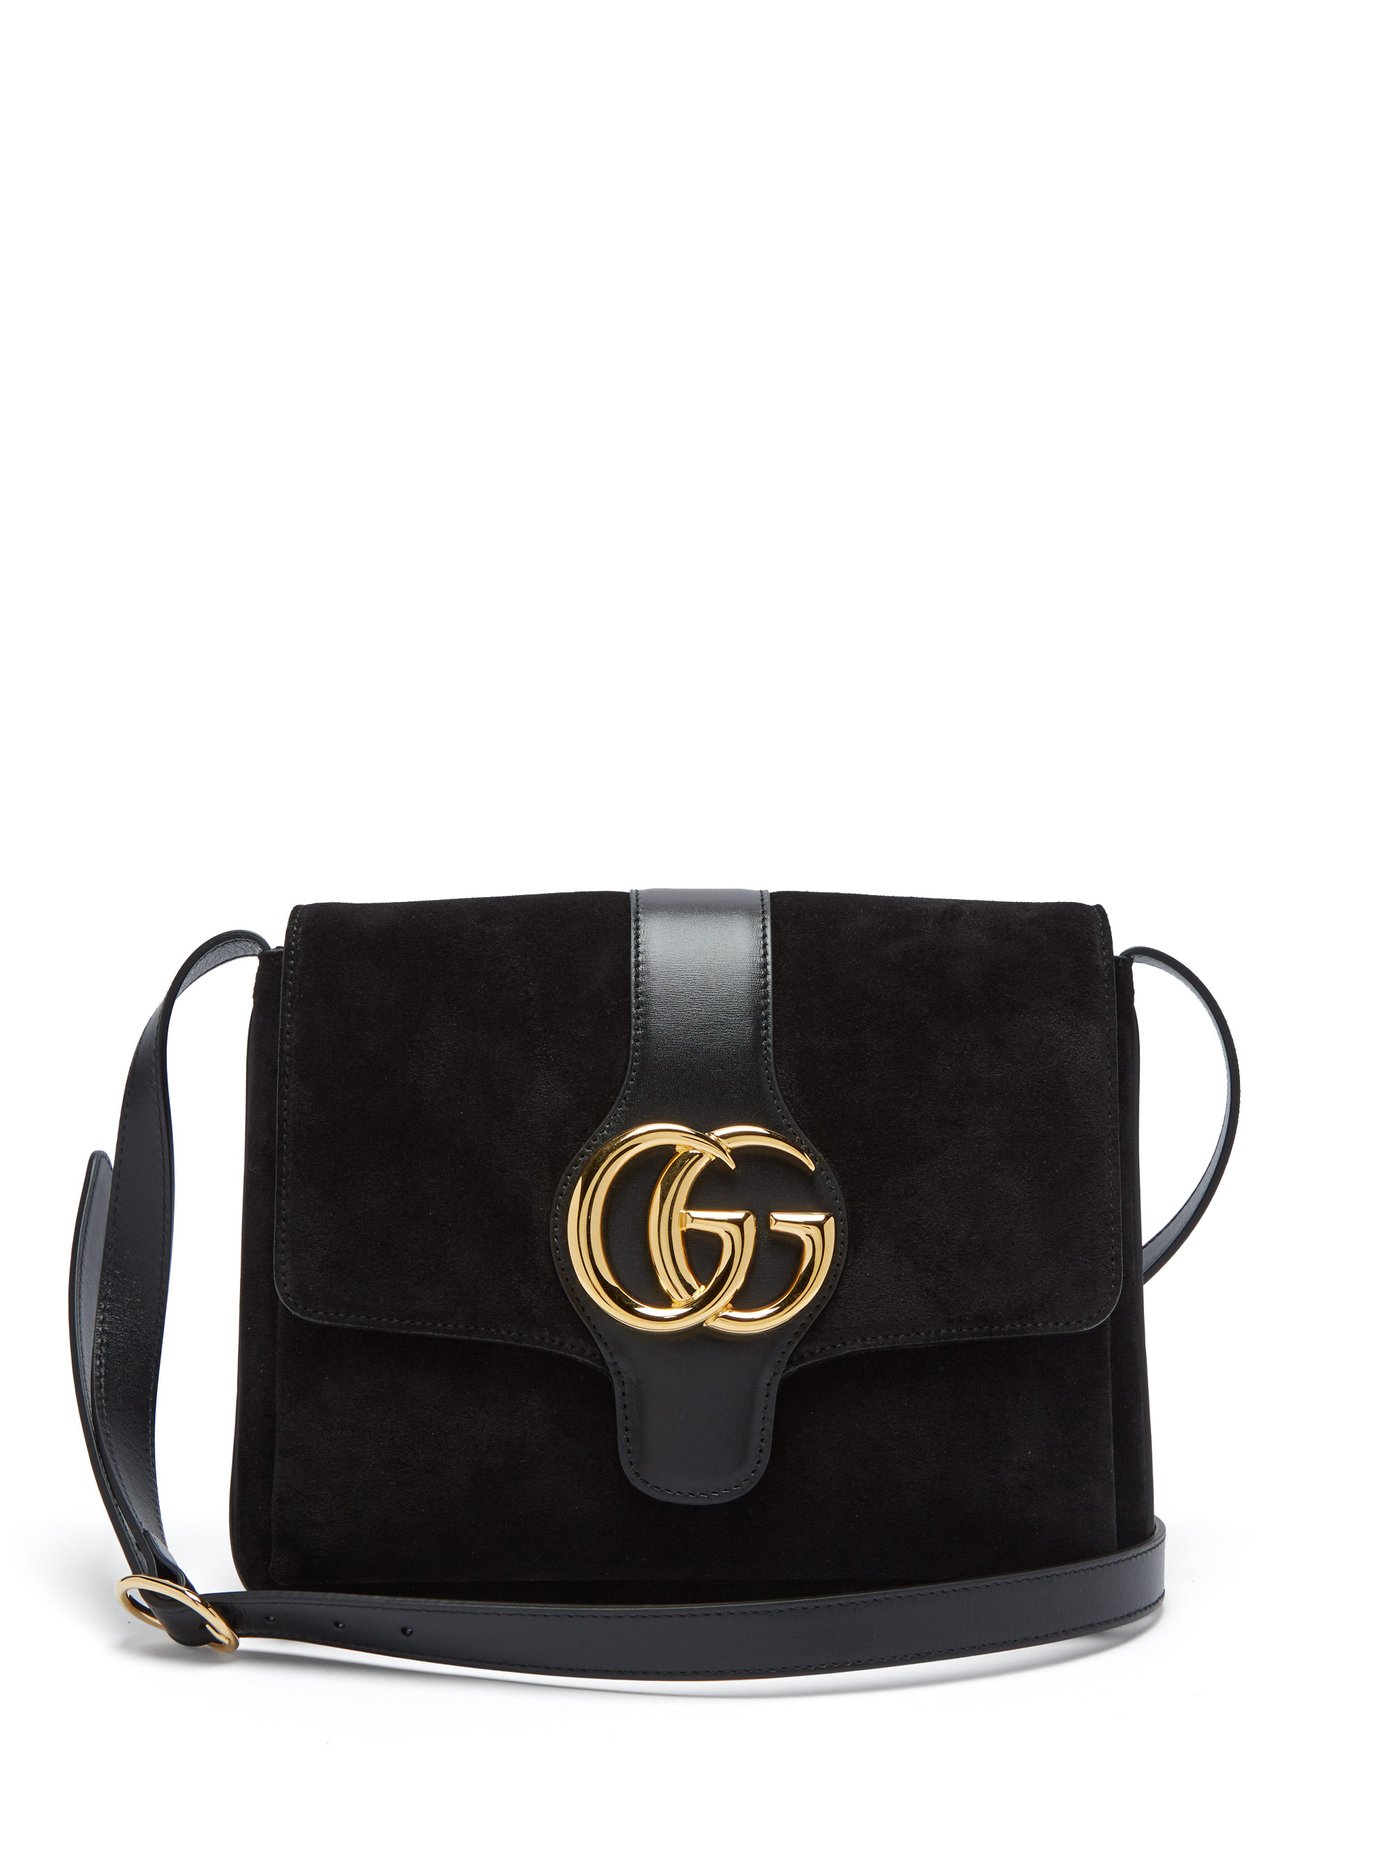 GG Arli suede and leather cross-body 